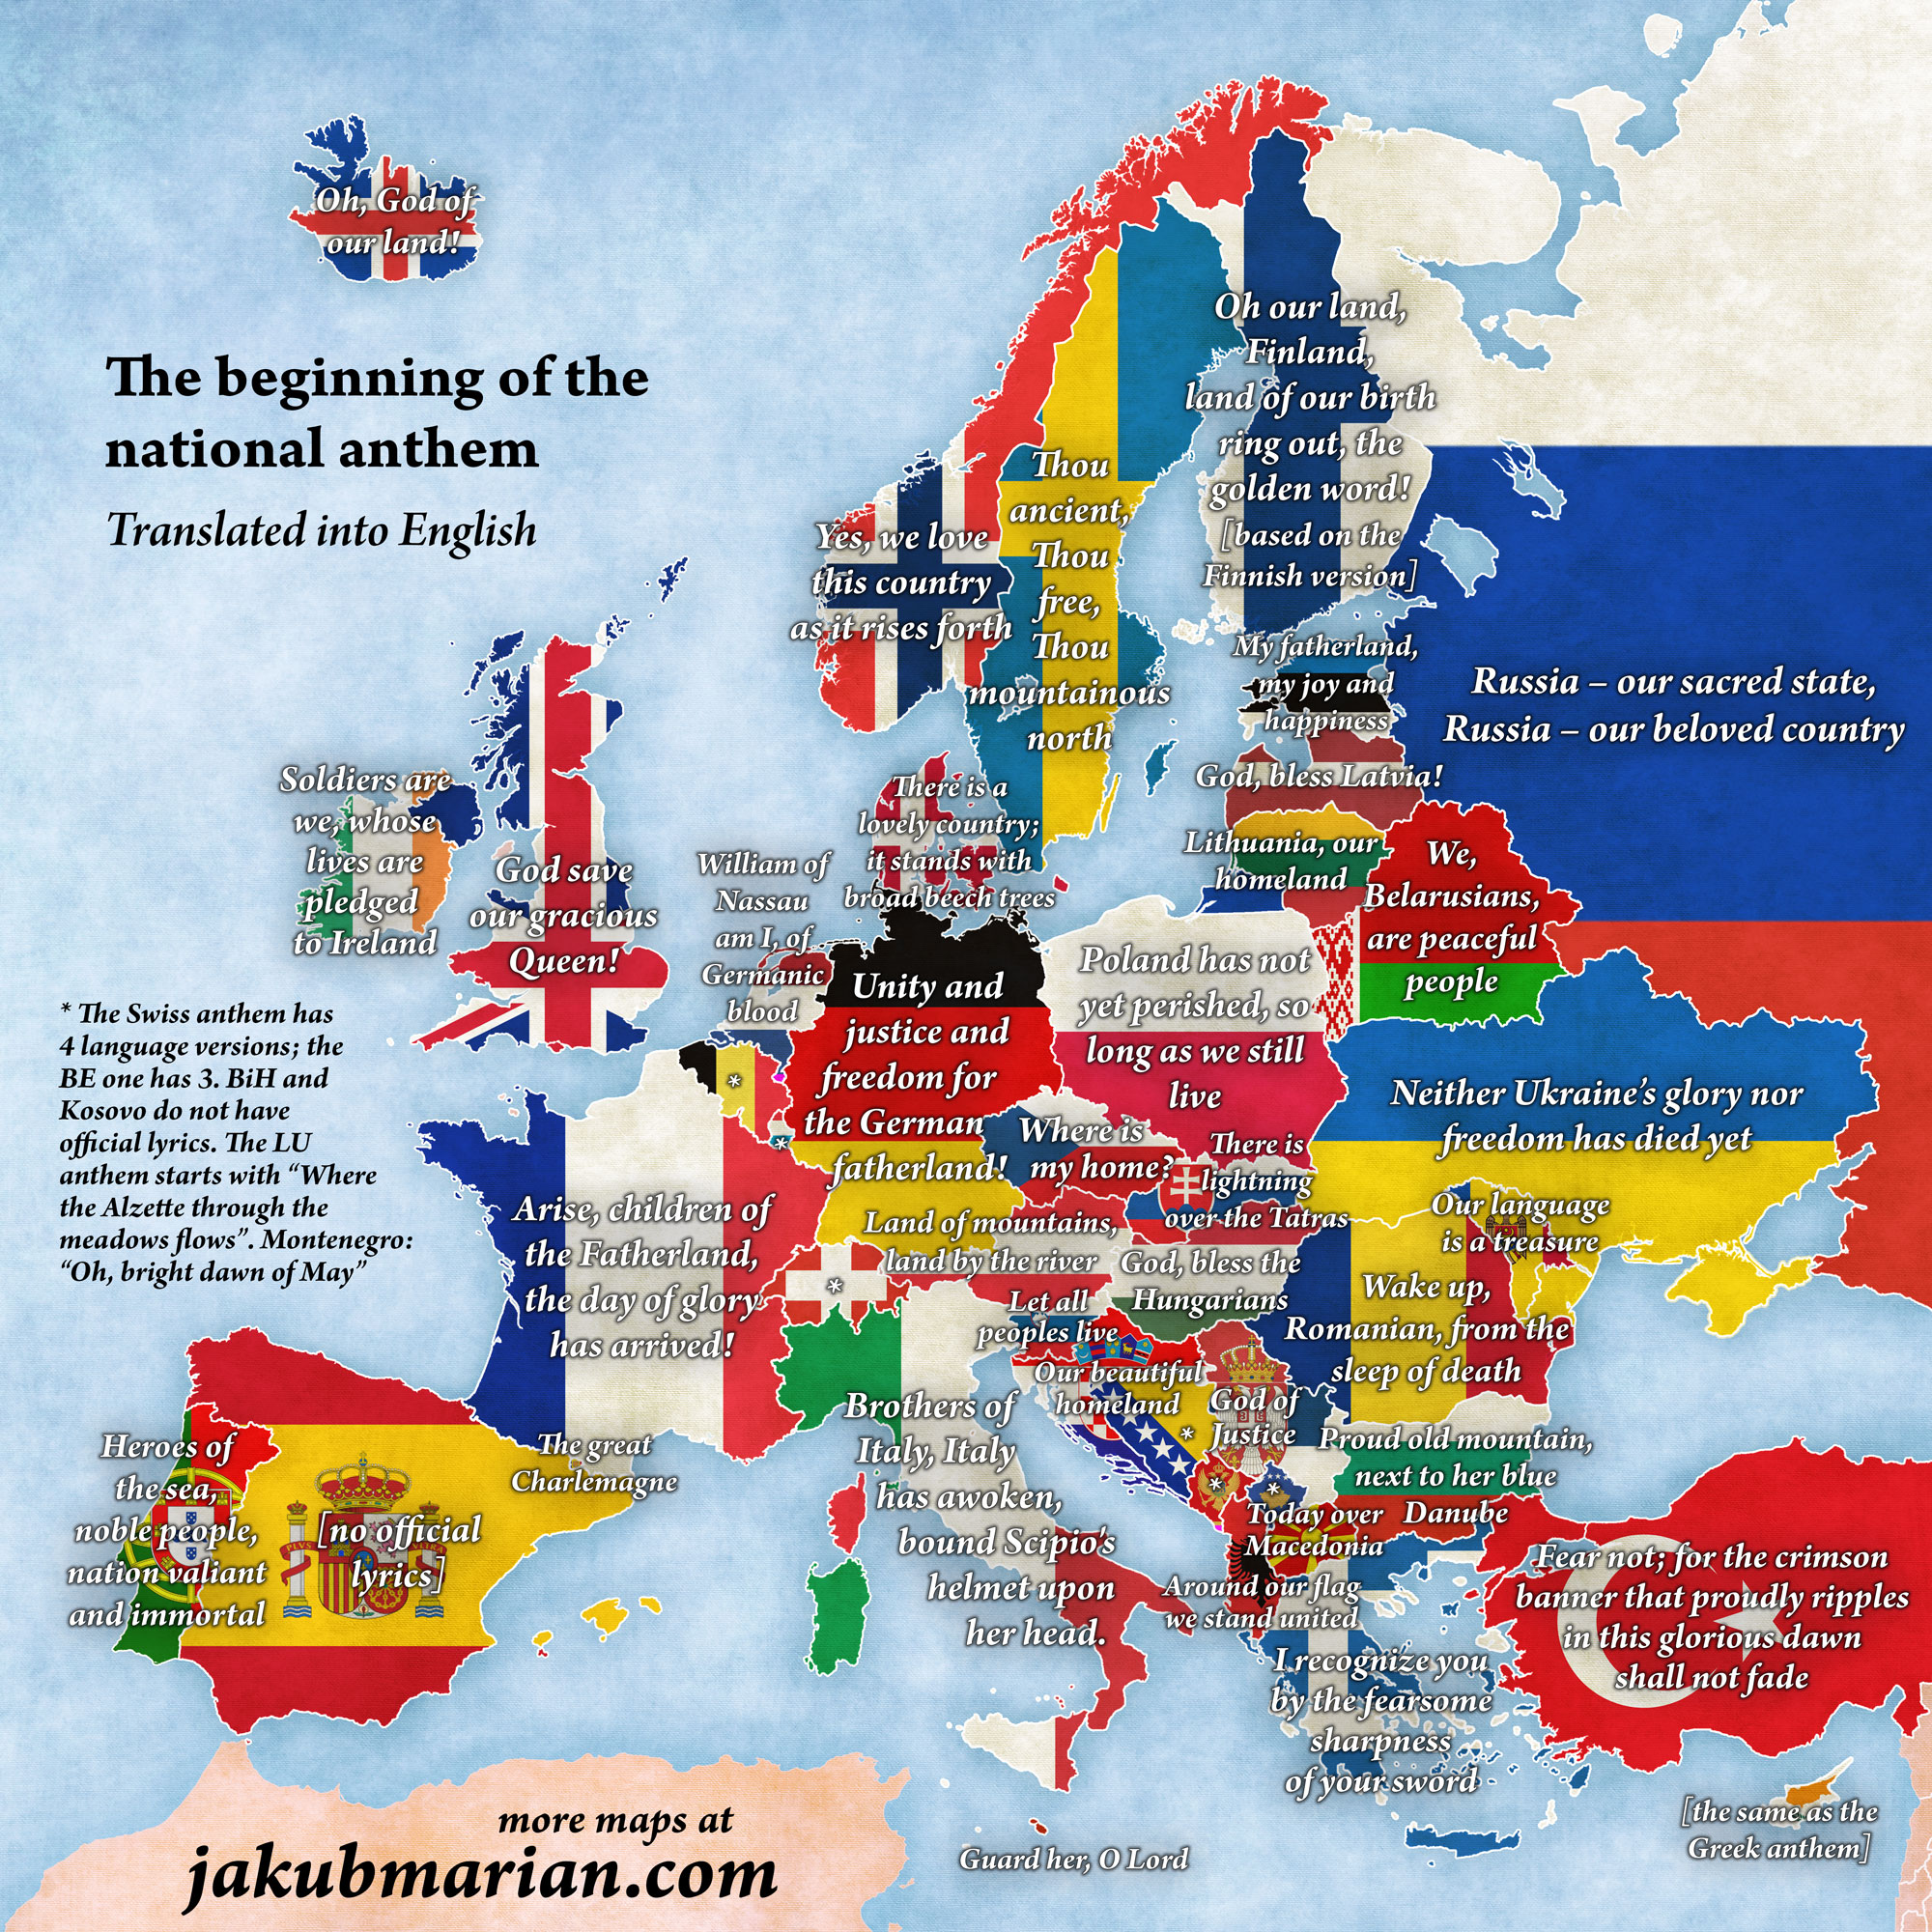 Anthems of European countries